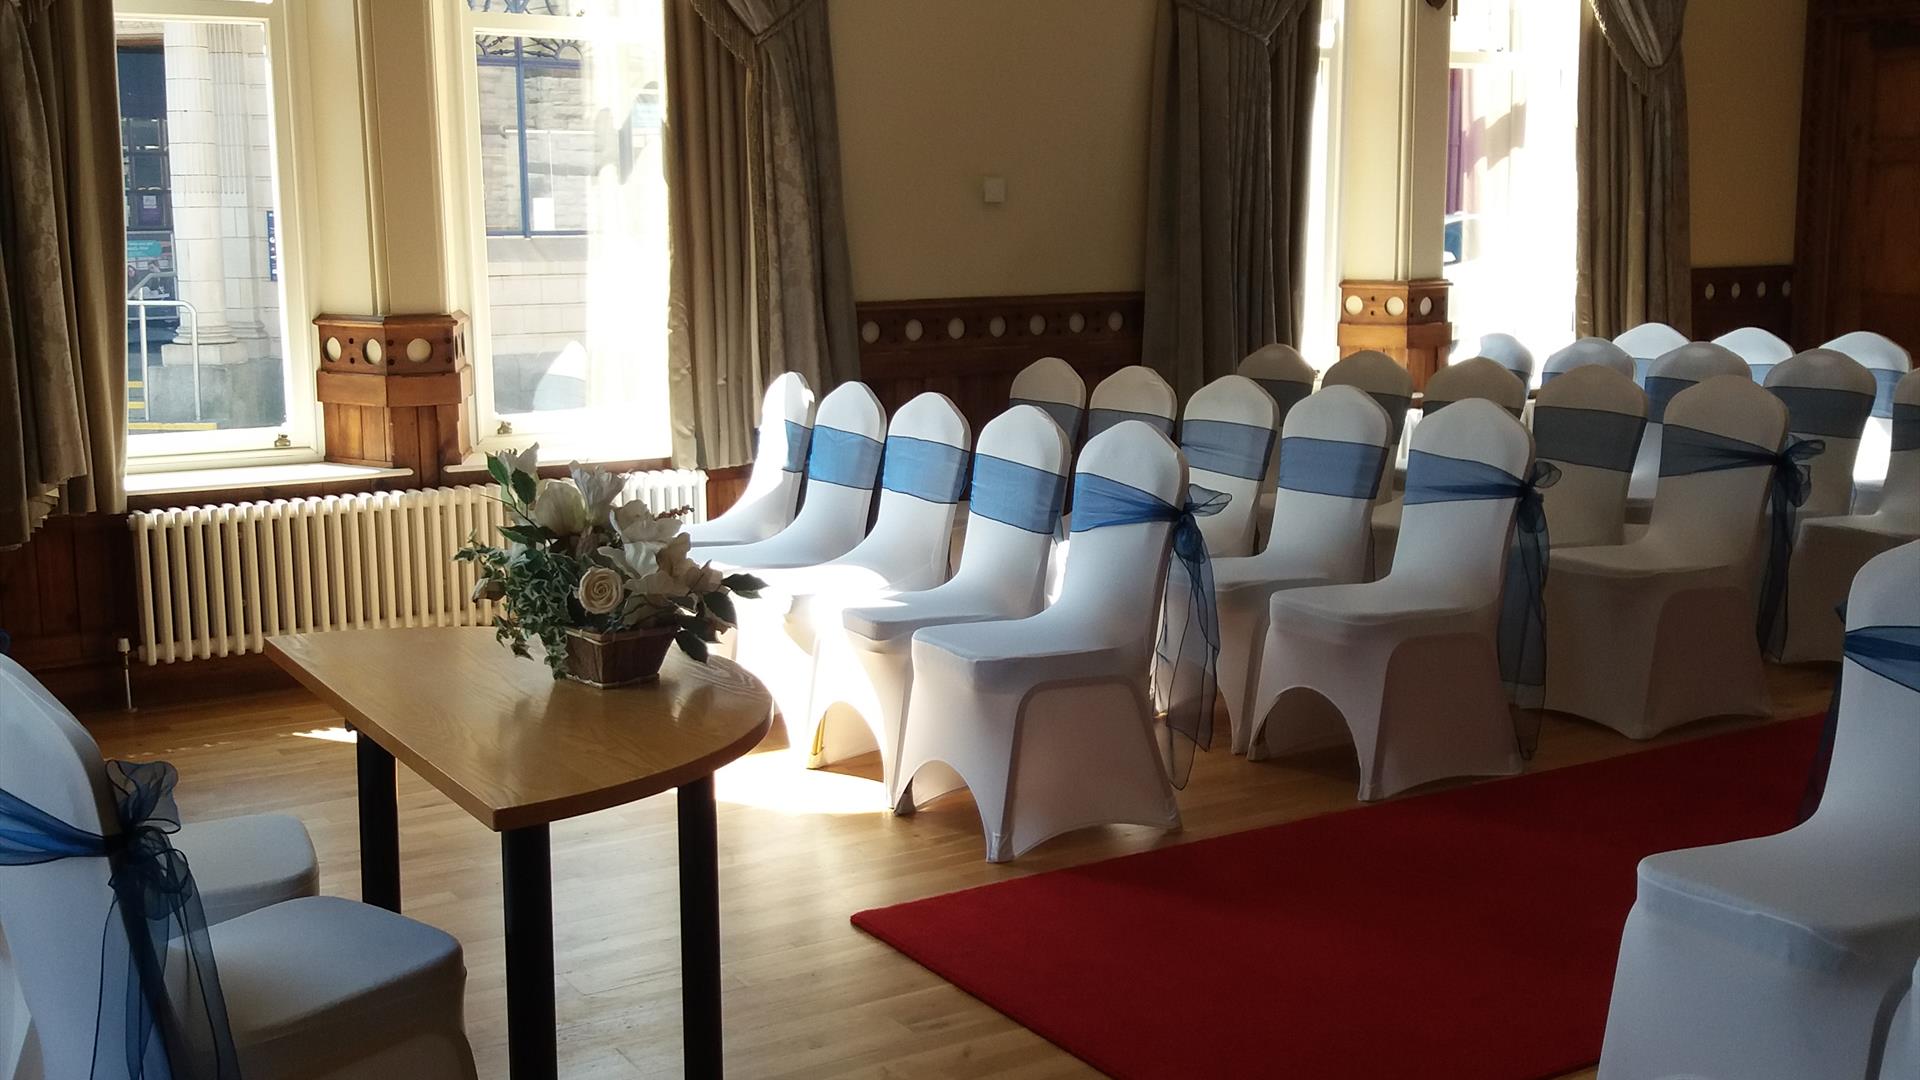 Seats set out for civil ceremony in Wilson Room in Larne Town Hall